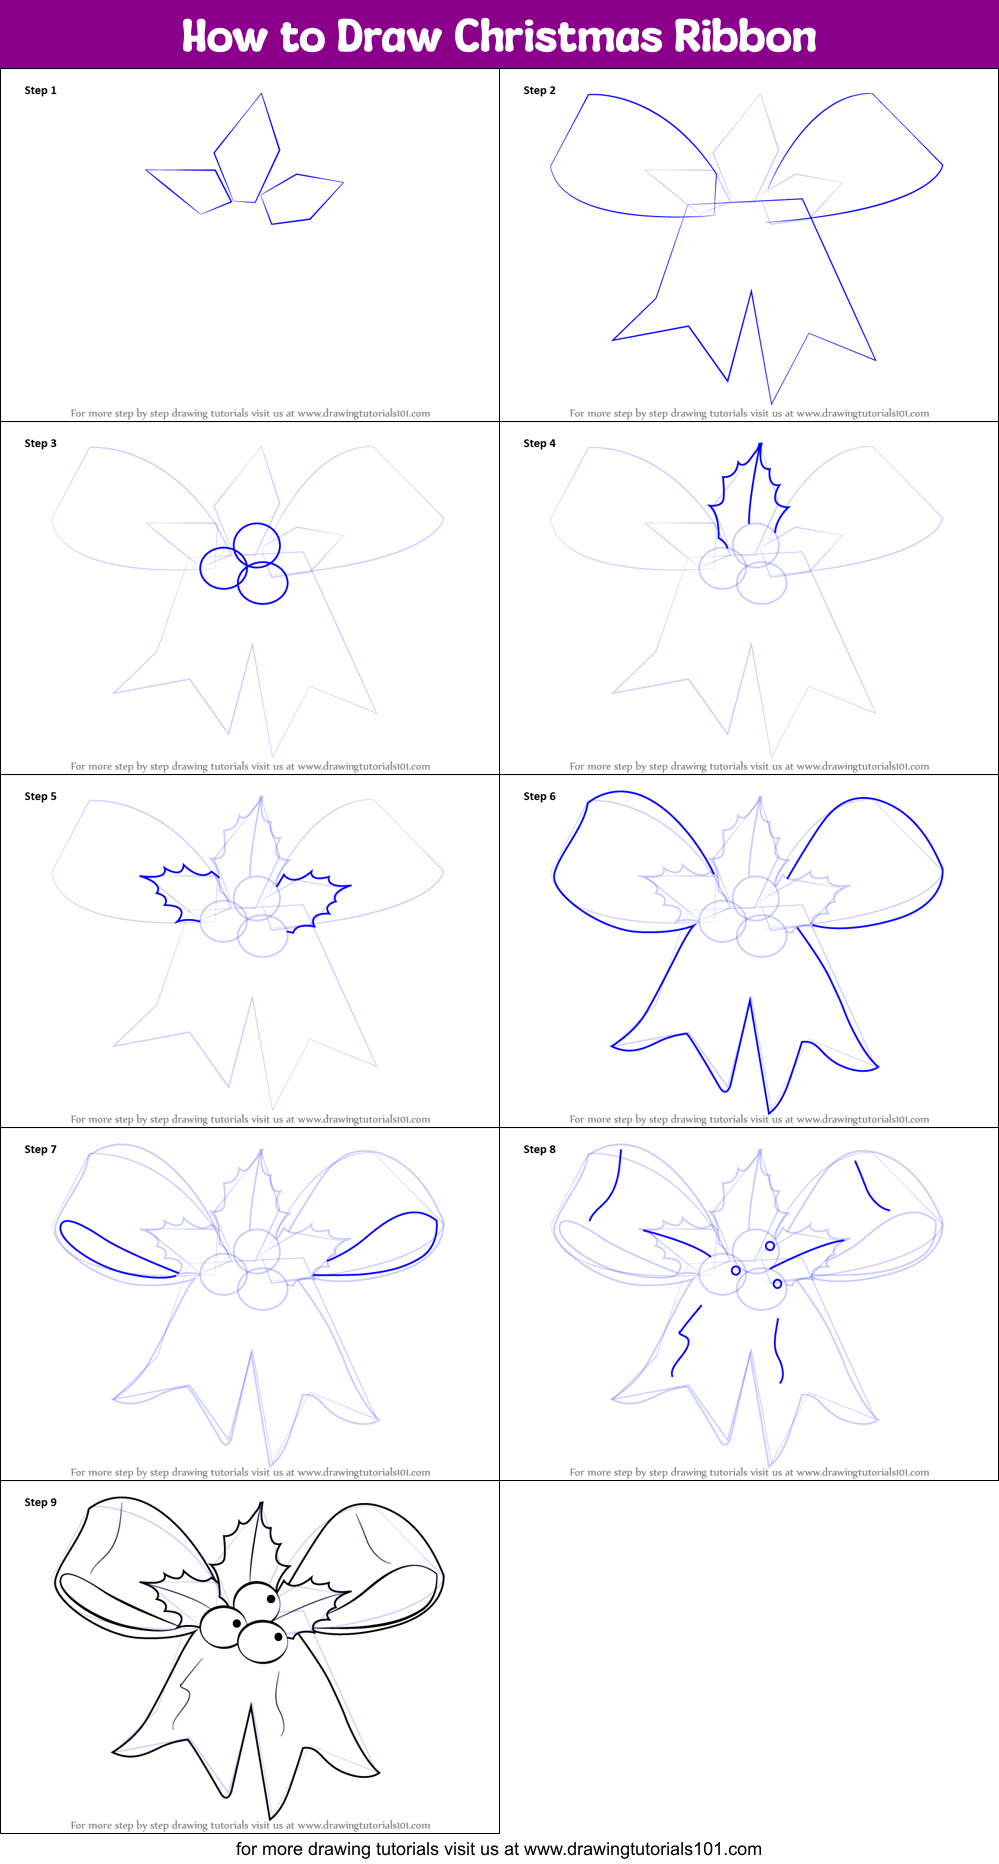 How to Draw Christmas Ribbon (Christmas) Step by Step ...